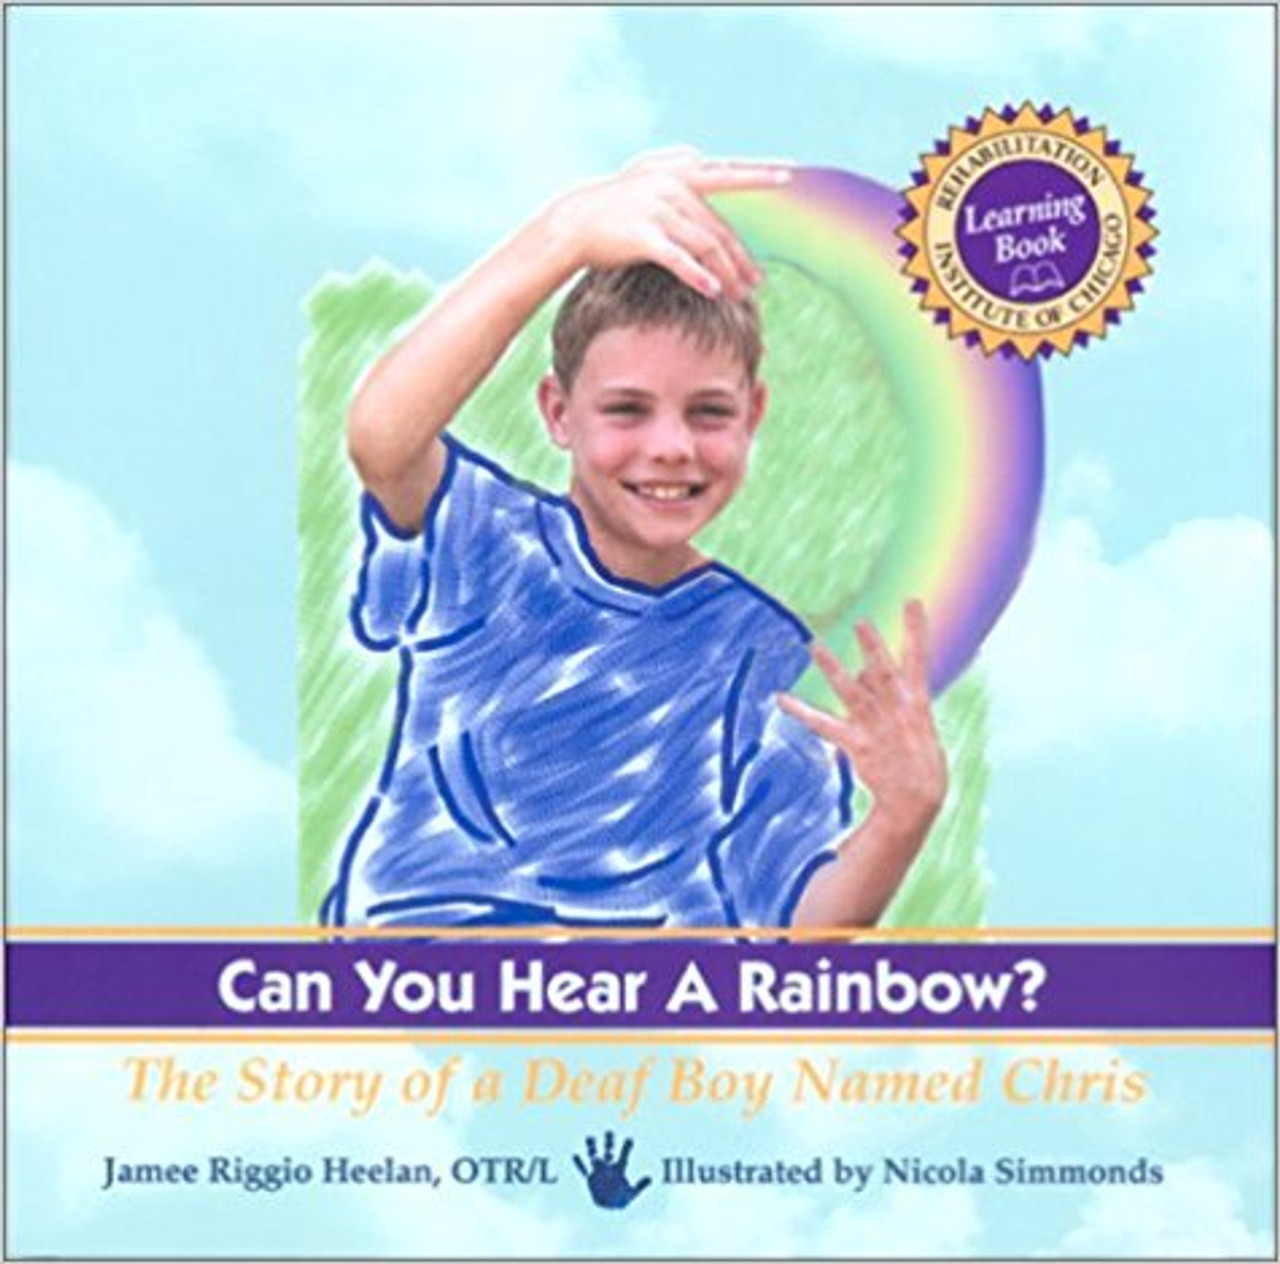 When Chris was a baby, his parents realized that he didn't notice the dog barking or a door slamming. Through a series of tests, doctors determined that he was deaf. In this intriguing, reassuring book, Chris tells young readers about what it is like to be deaf and describes typical events in his life and the ways he has adjusted to his hearing loss. With sign language, speech therapy, and an interpreter, Chris's days are much like those of hearing children, filled with classes, soccer games, and children's theater. Accompanied by Simmonds' vivid and energetic multimedia paintings, Heelan's text explores the world of a real child and answers the questions many children may have about hearing loss.